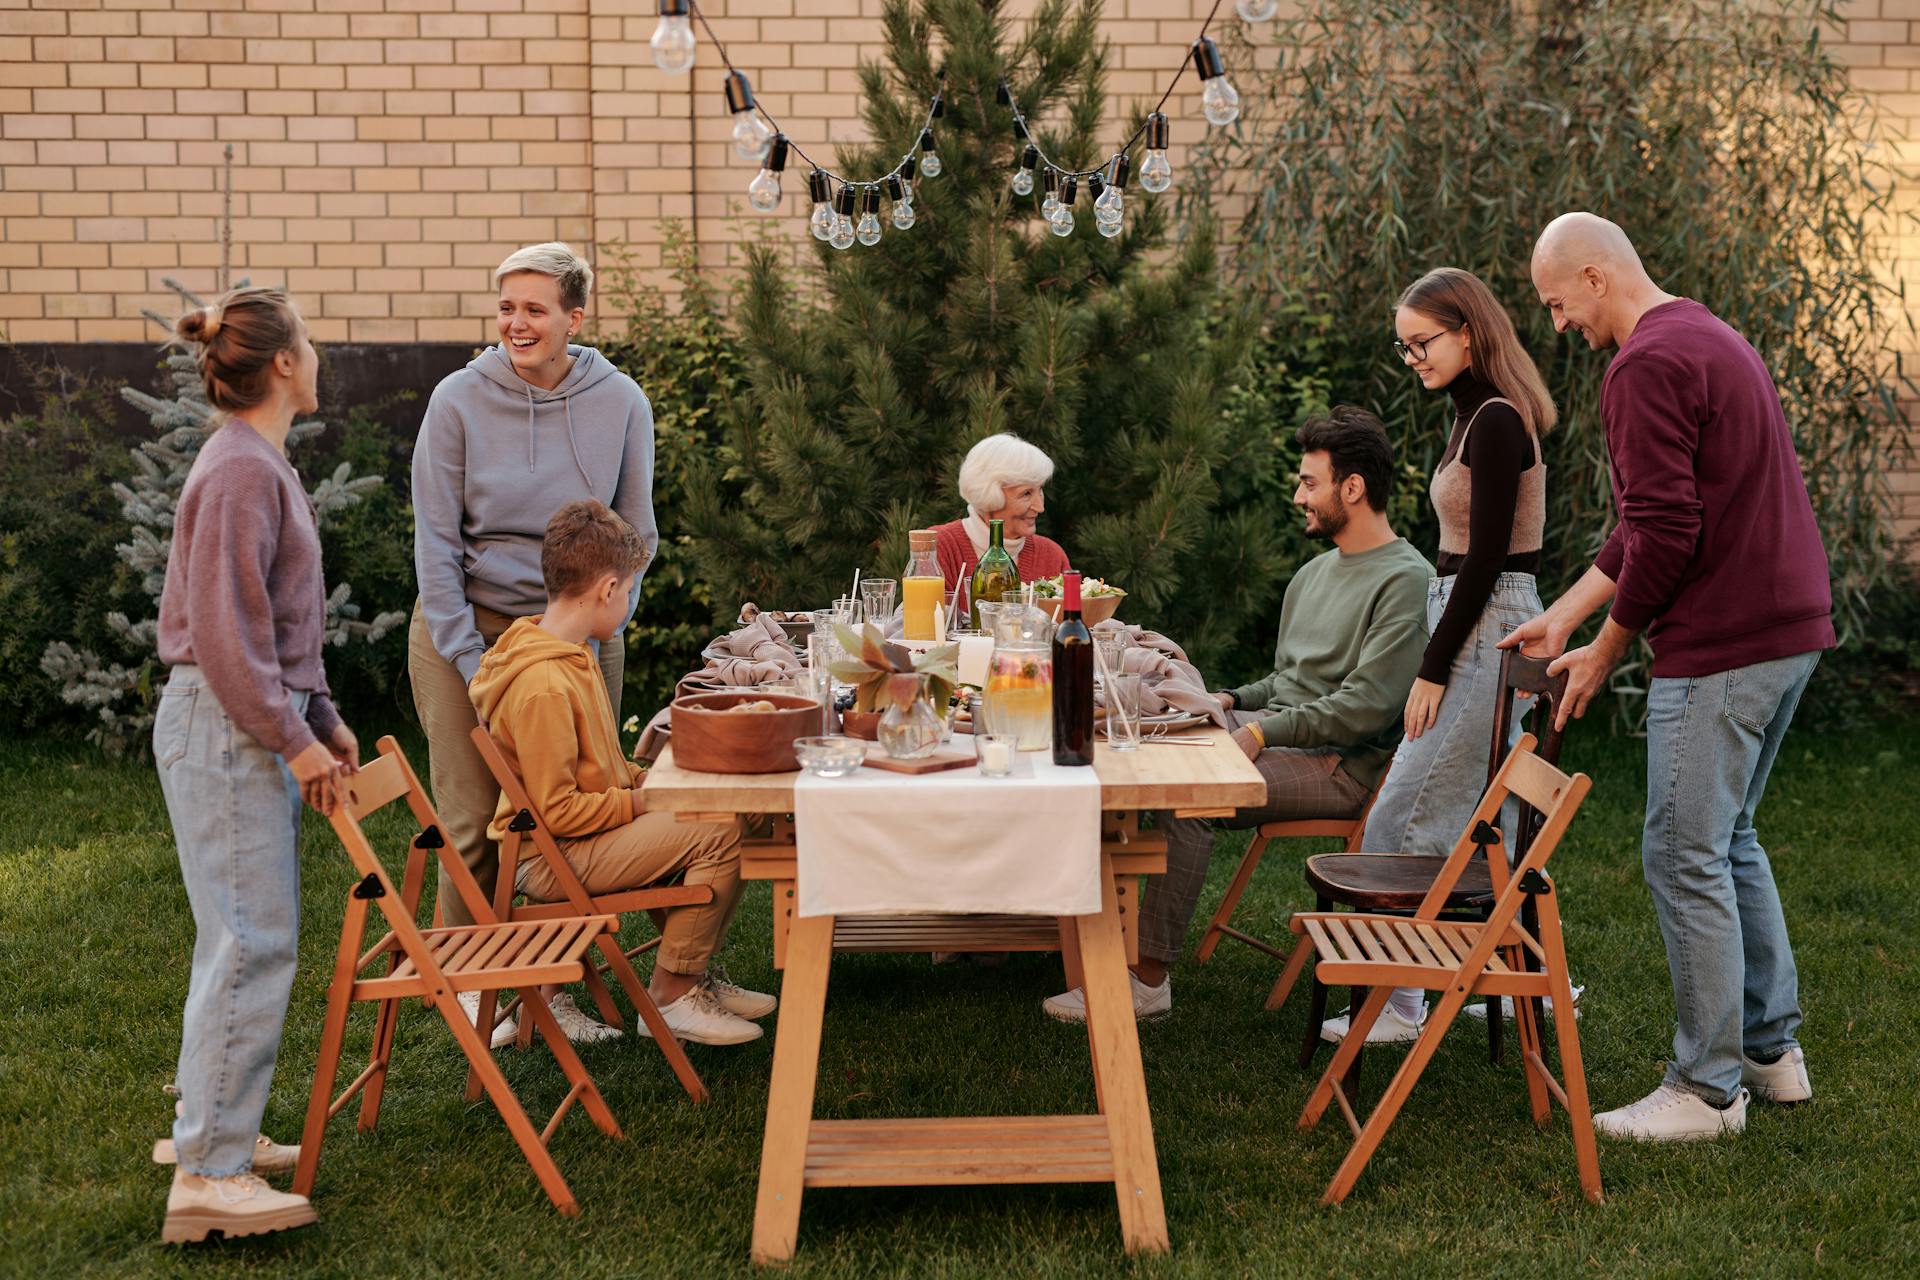 Family members gathered around the dinner table in their garden | Source: Pexels